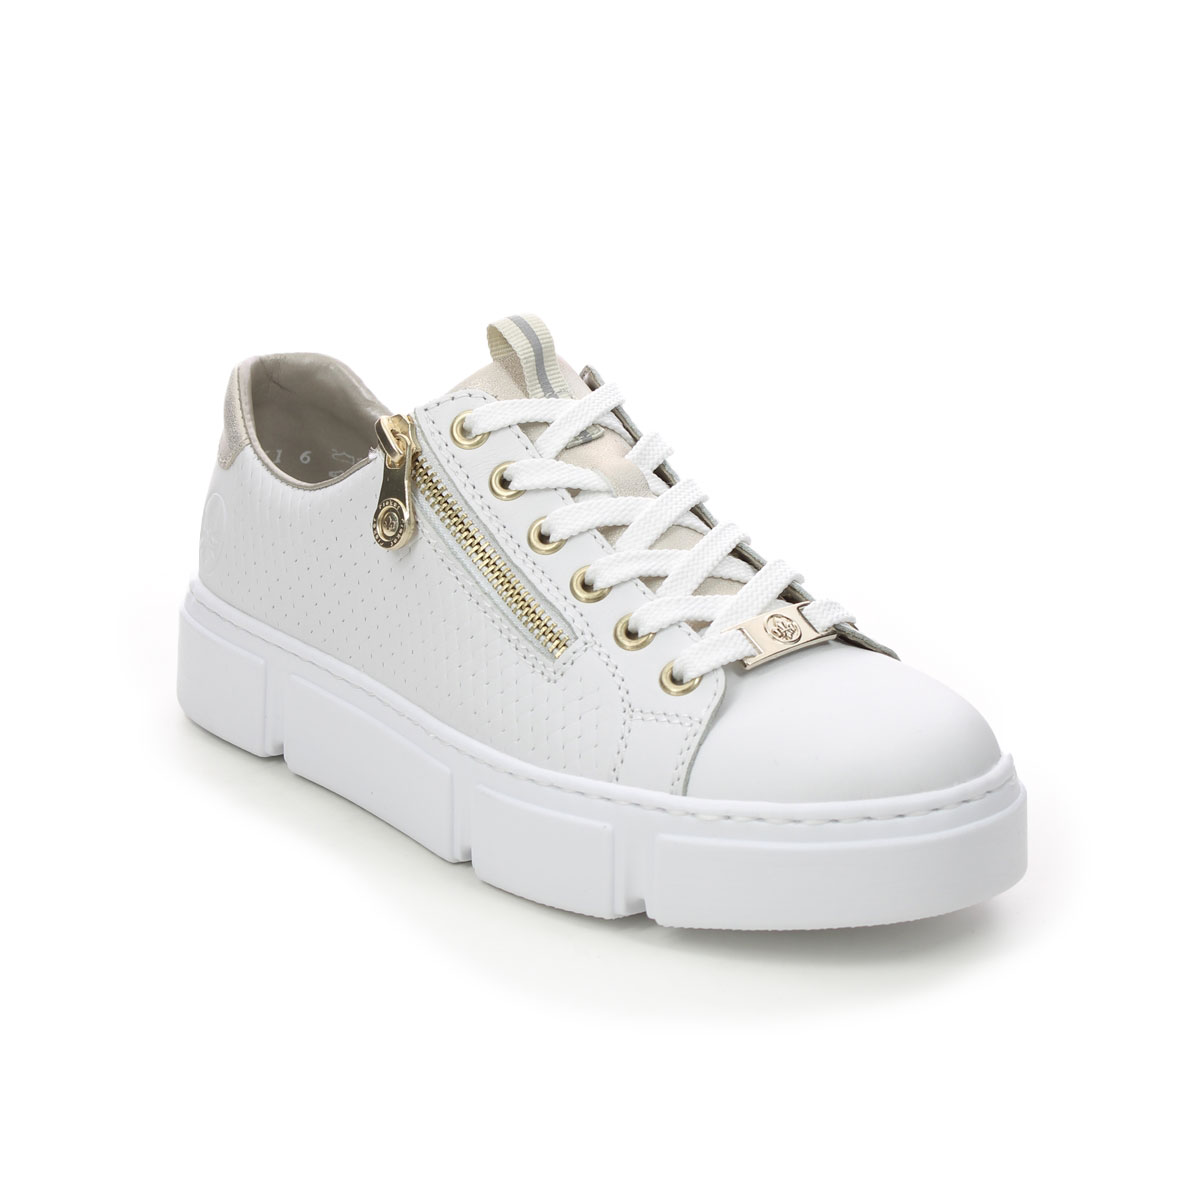 Rieker Hagen White Leather Womens Trainers N5932-80 In Size 39 In Plain White Leather